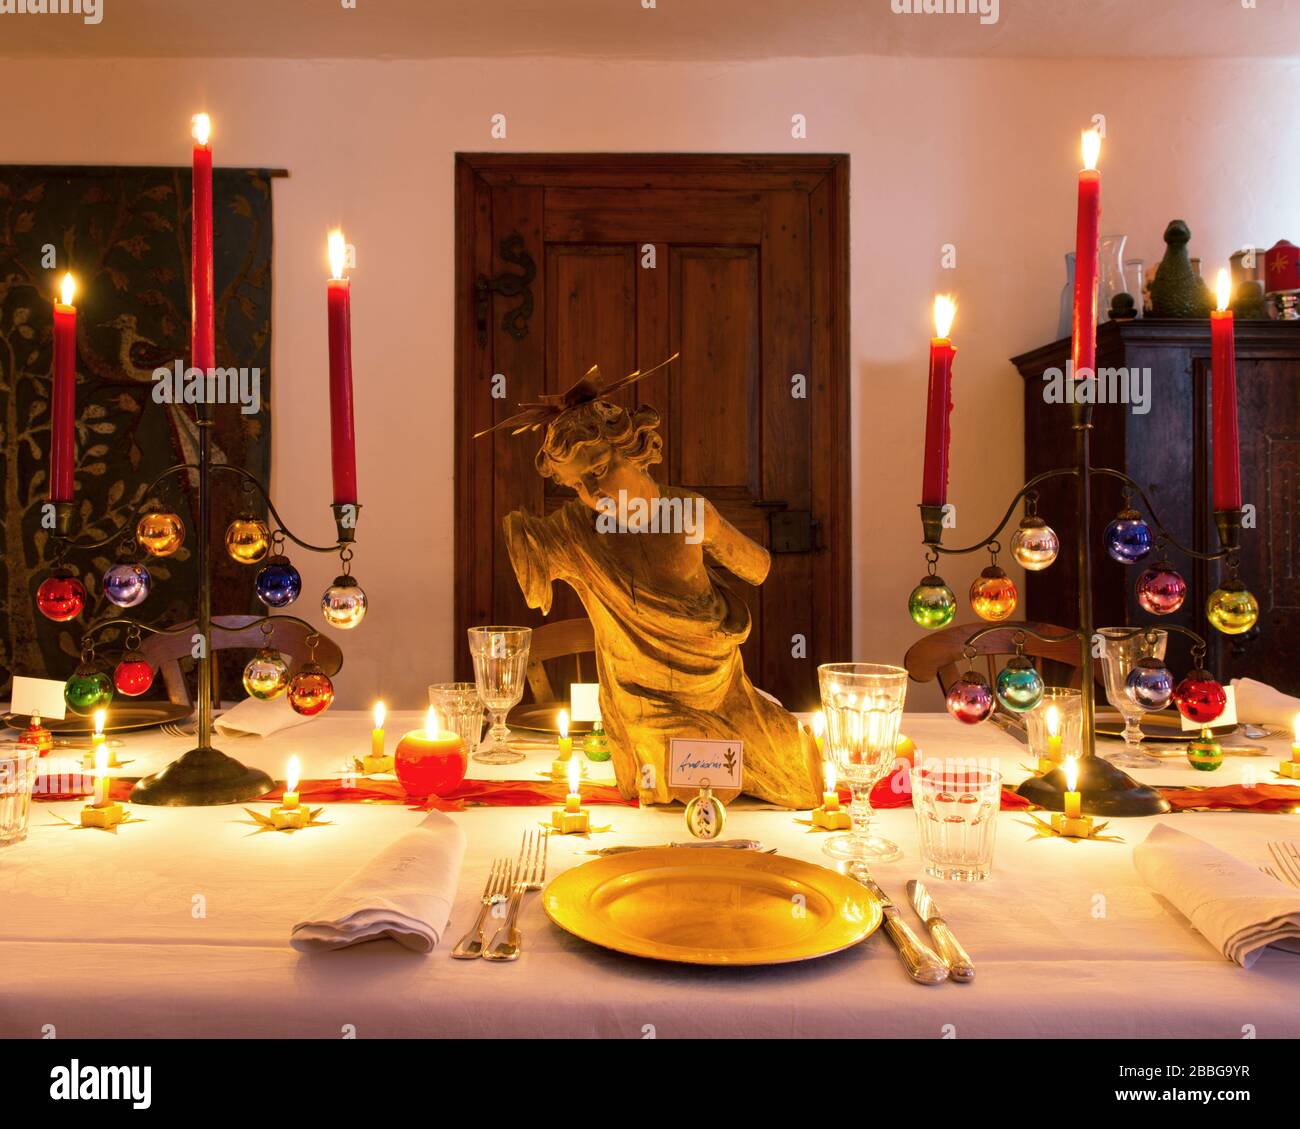 dining table with Christmas decorations and burning candles Stock